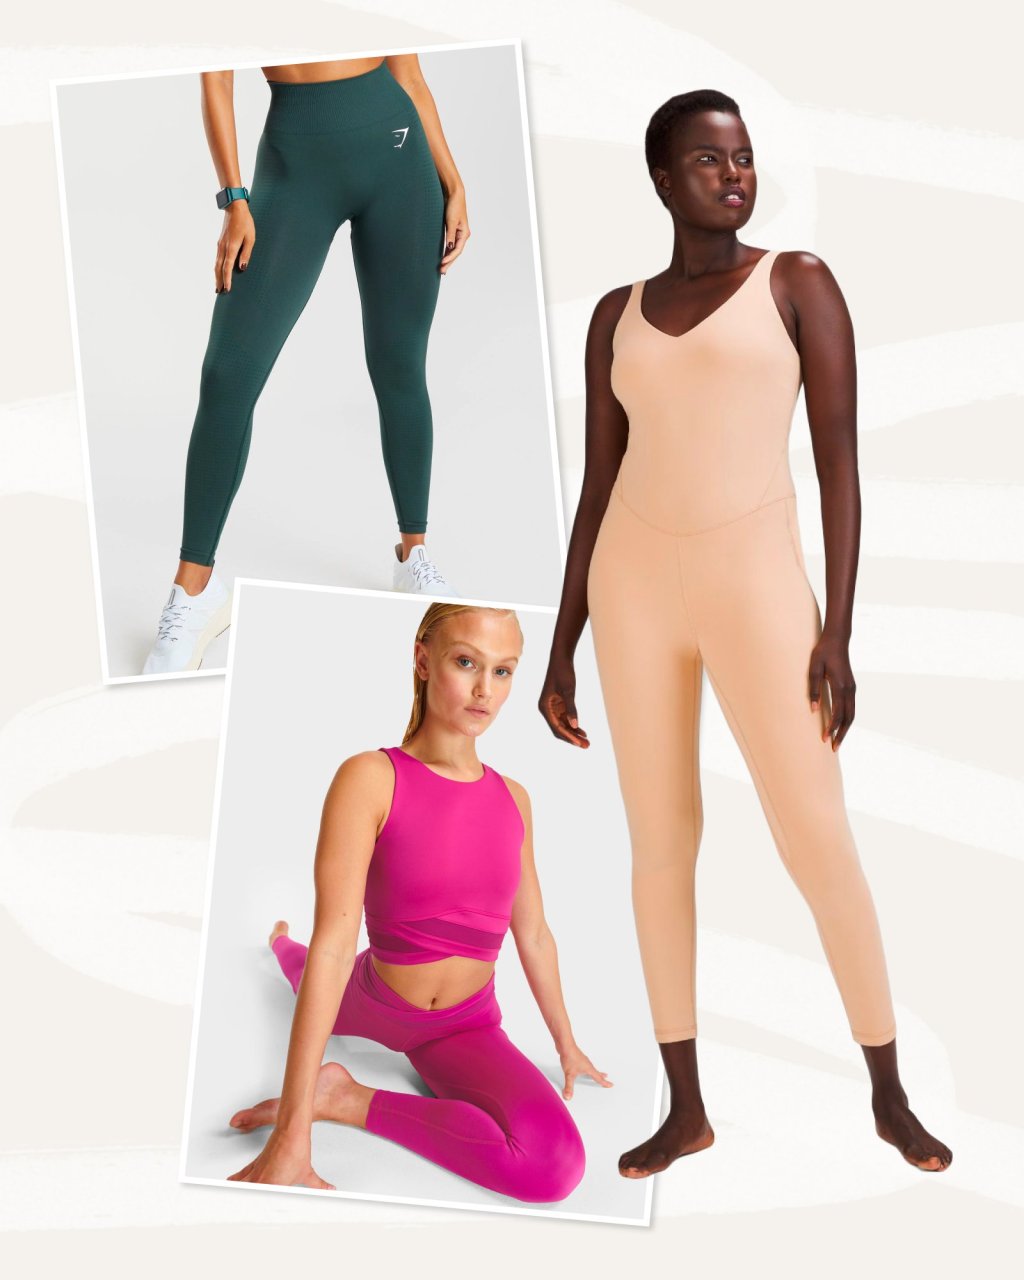 What's The Best Outfit For A Pilates Class?